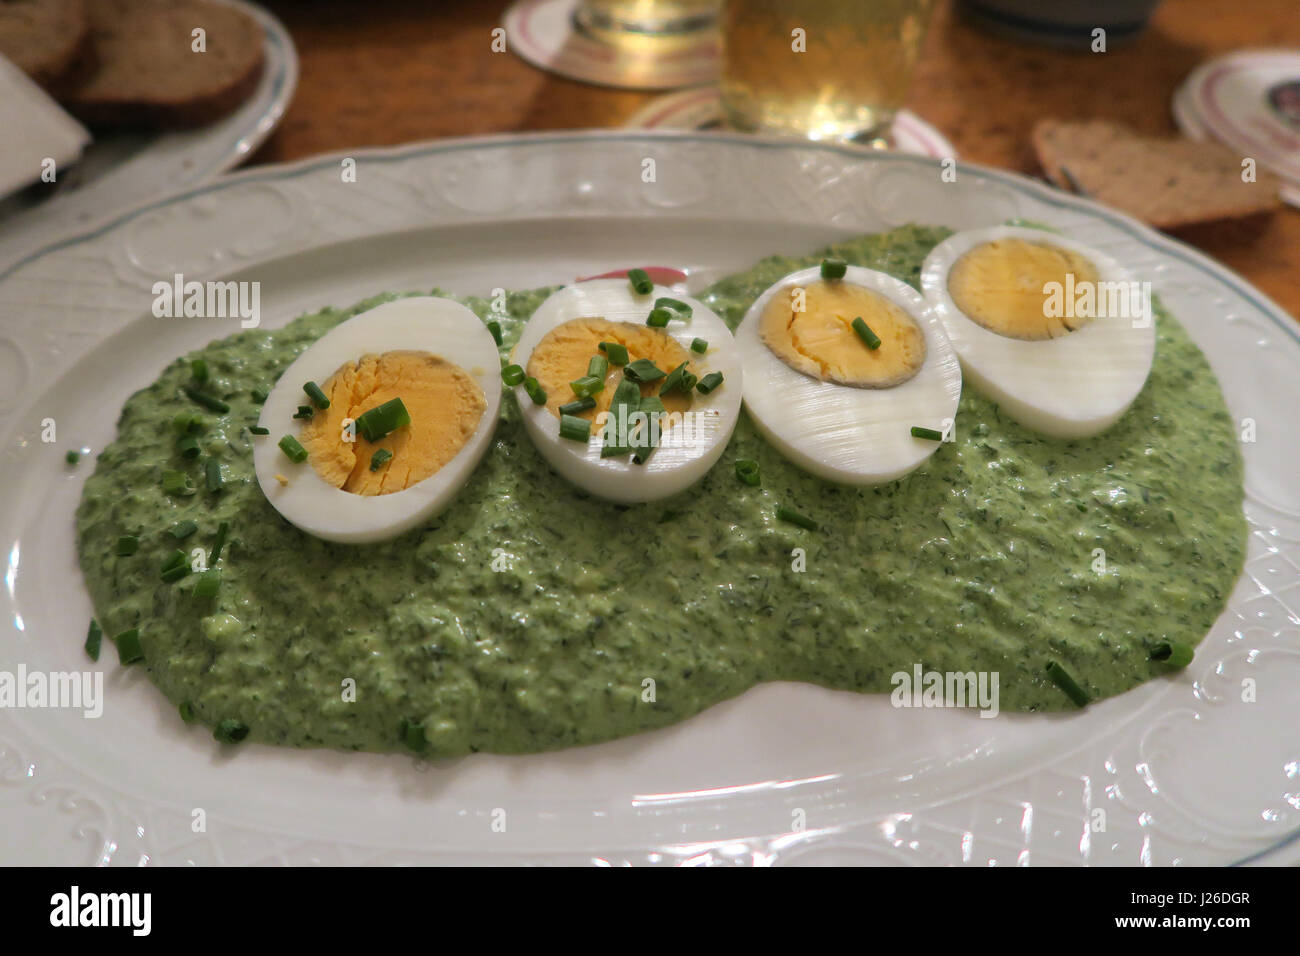 Sliced hard boiled eggs over spinach spred Stock Photo